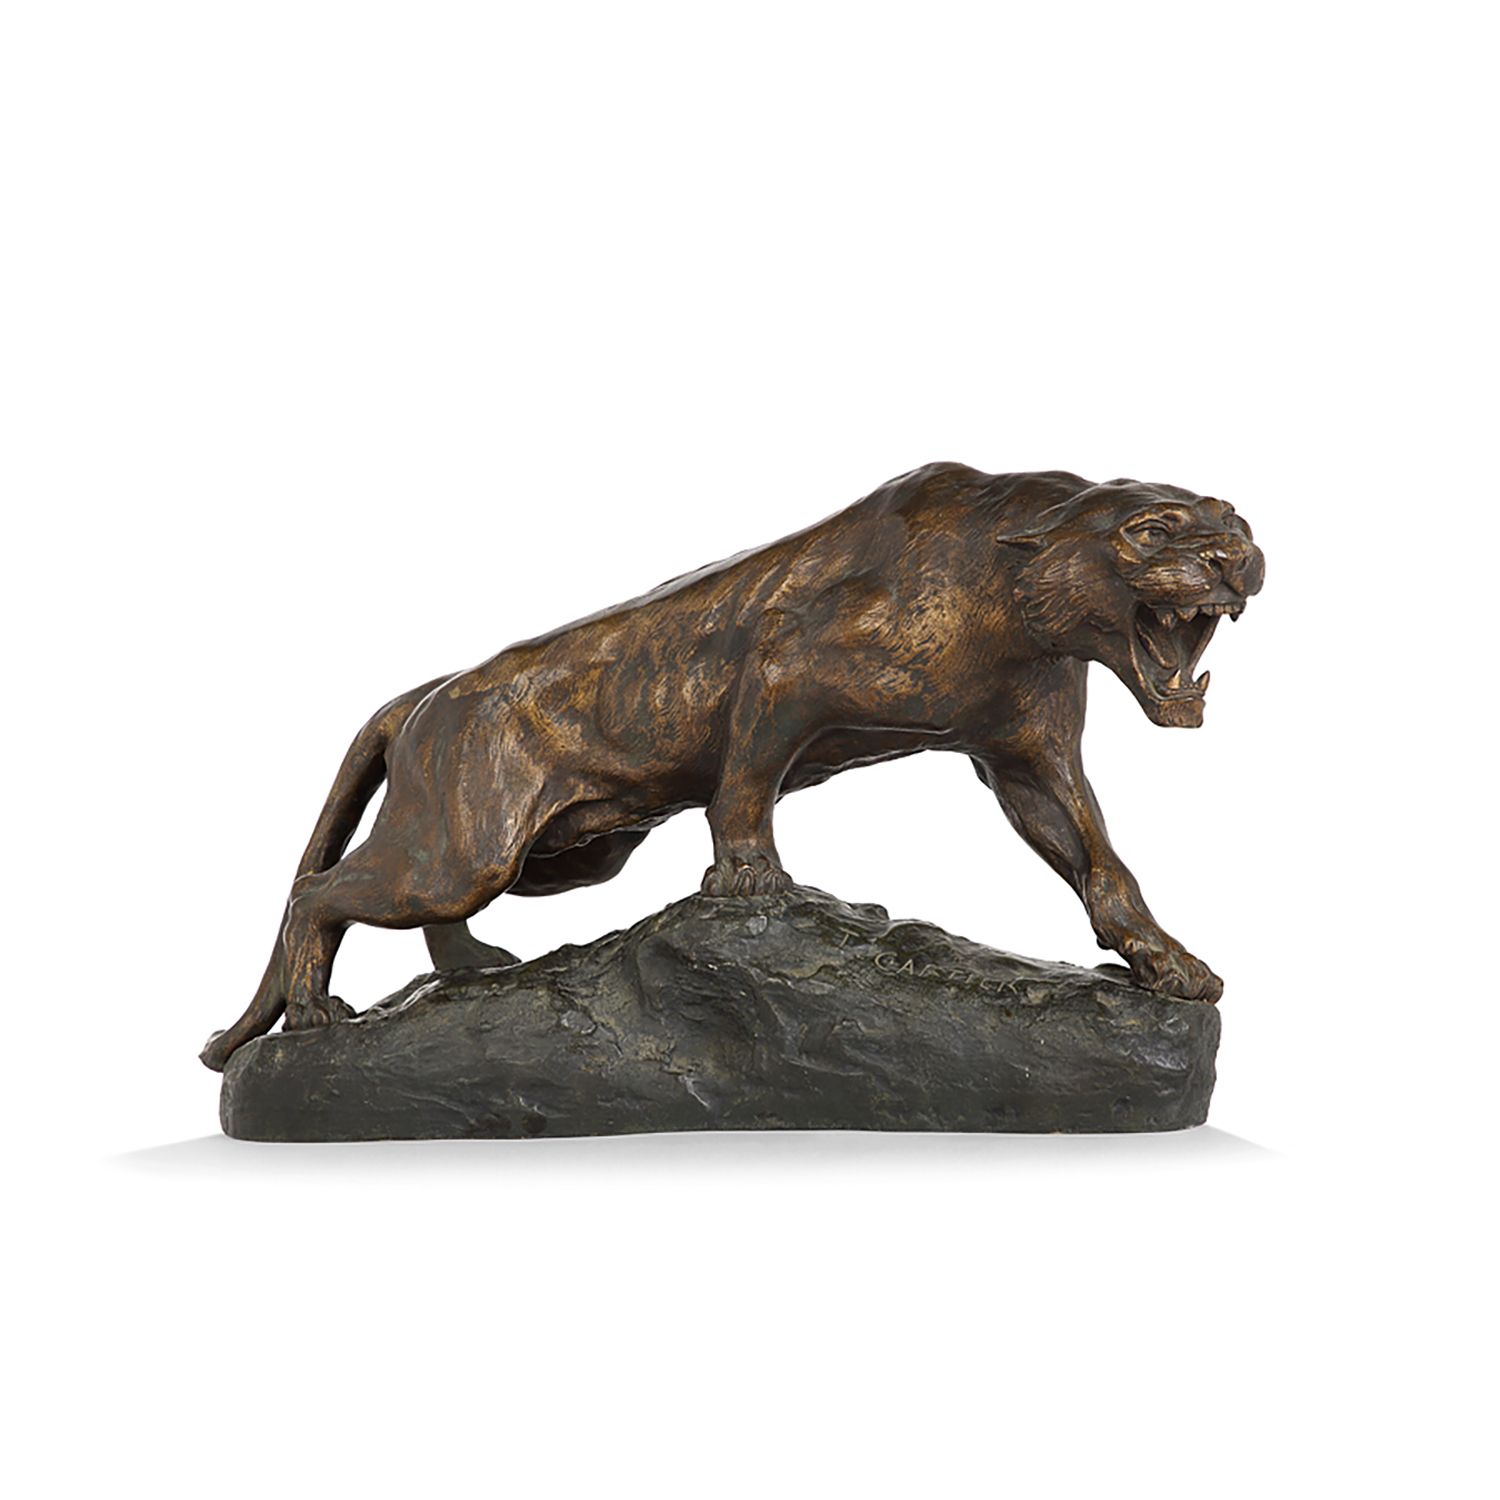 Null THOMAS CARTIER (1879-1943)

FIRED TIGER

Bronze with contrasting brown pati&hellip;